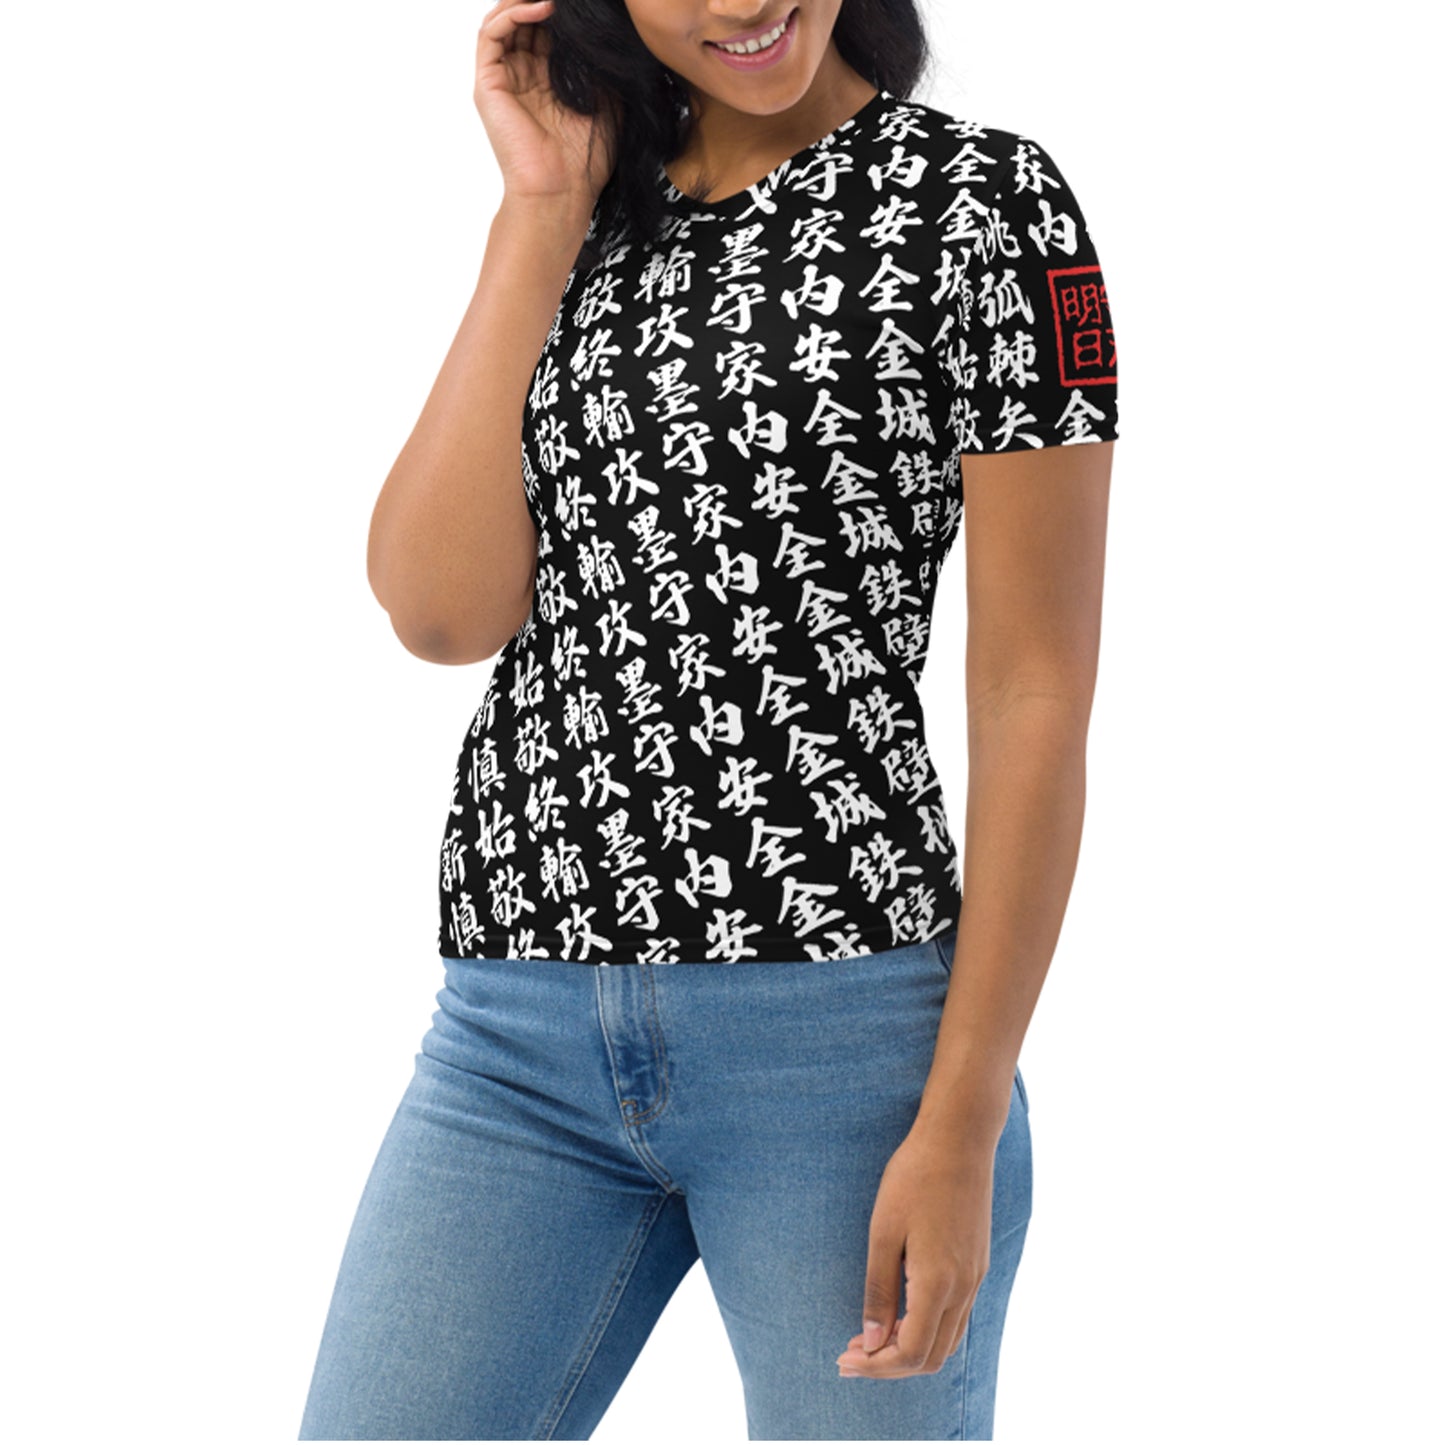 Women black Crew Neck T-Shirt with all-over print in Japanese KANJI